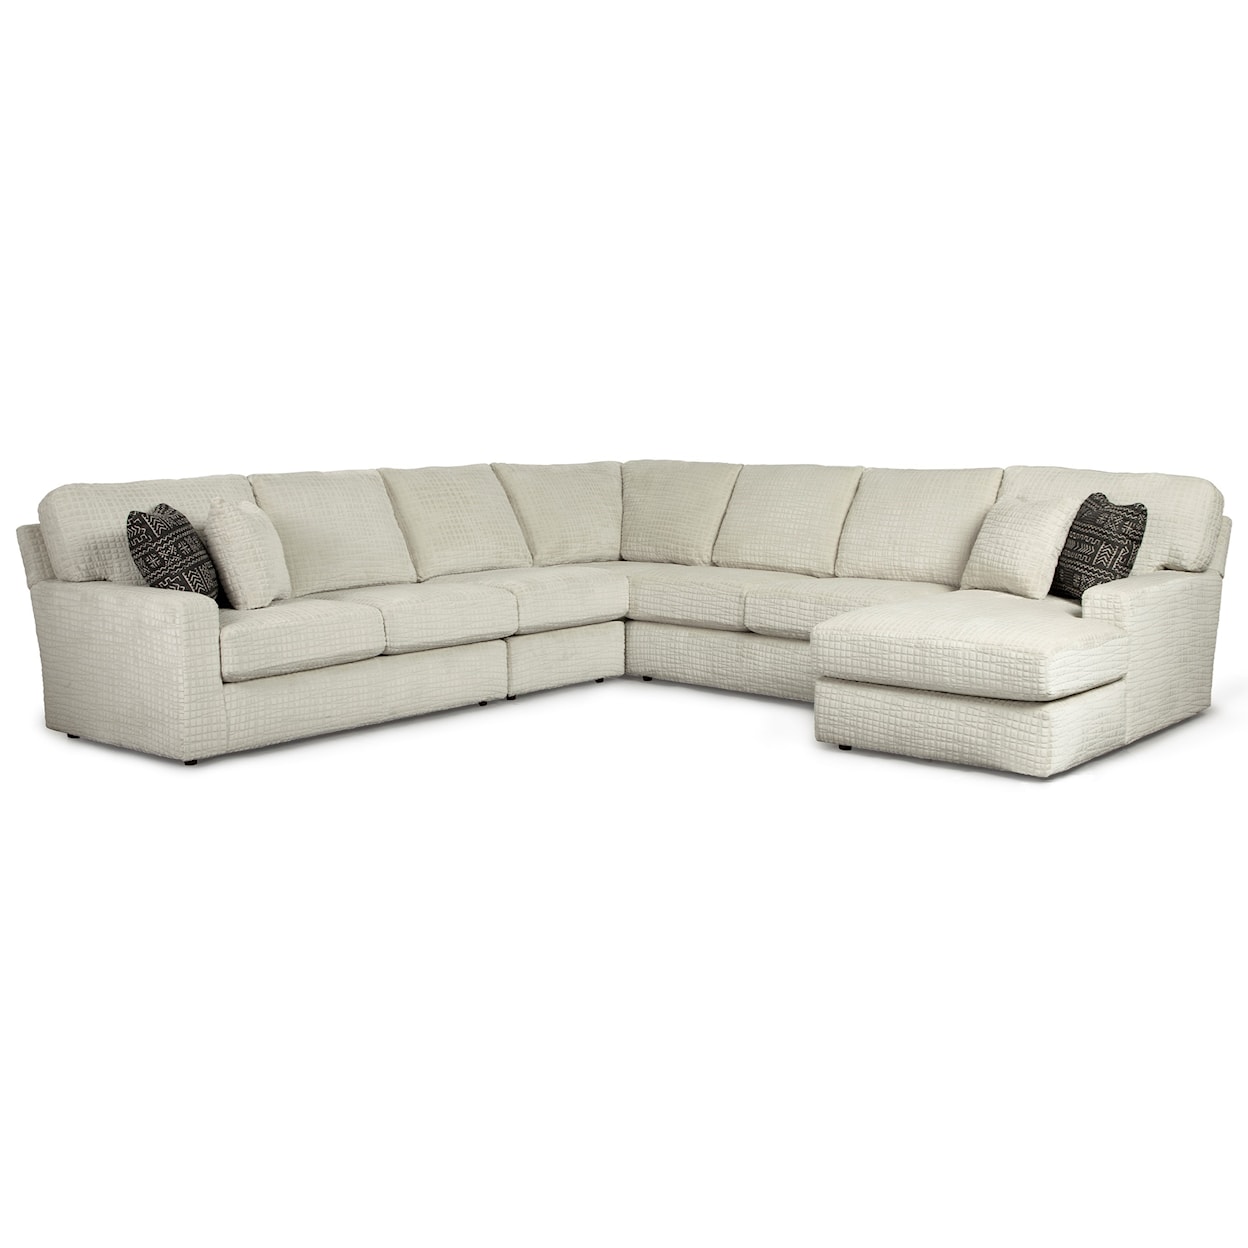 Best Home Furnishings Dovely 5 Pc Sectional Sofa w/ RAF Chaise